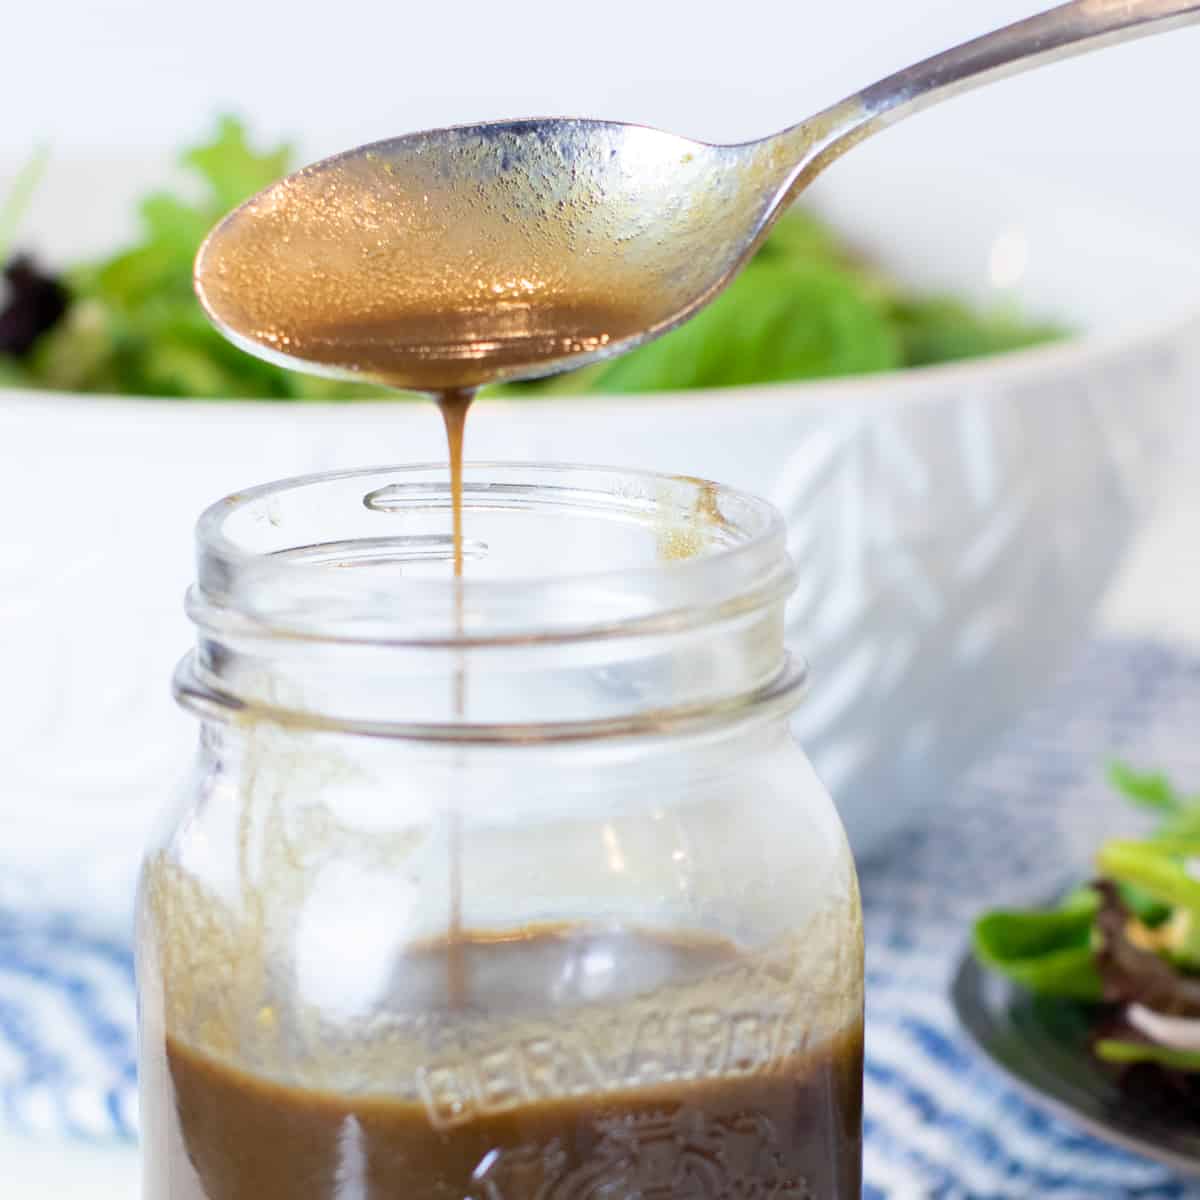 A spoonful of vinaigrette being drizzled into a jar.